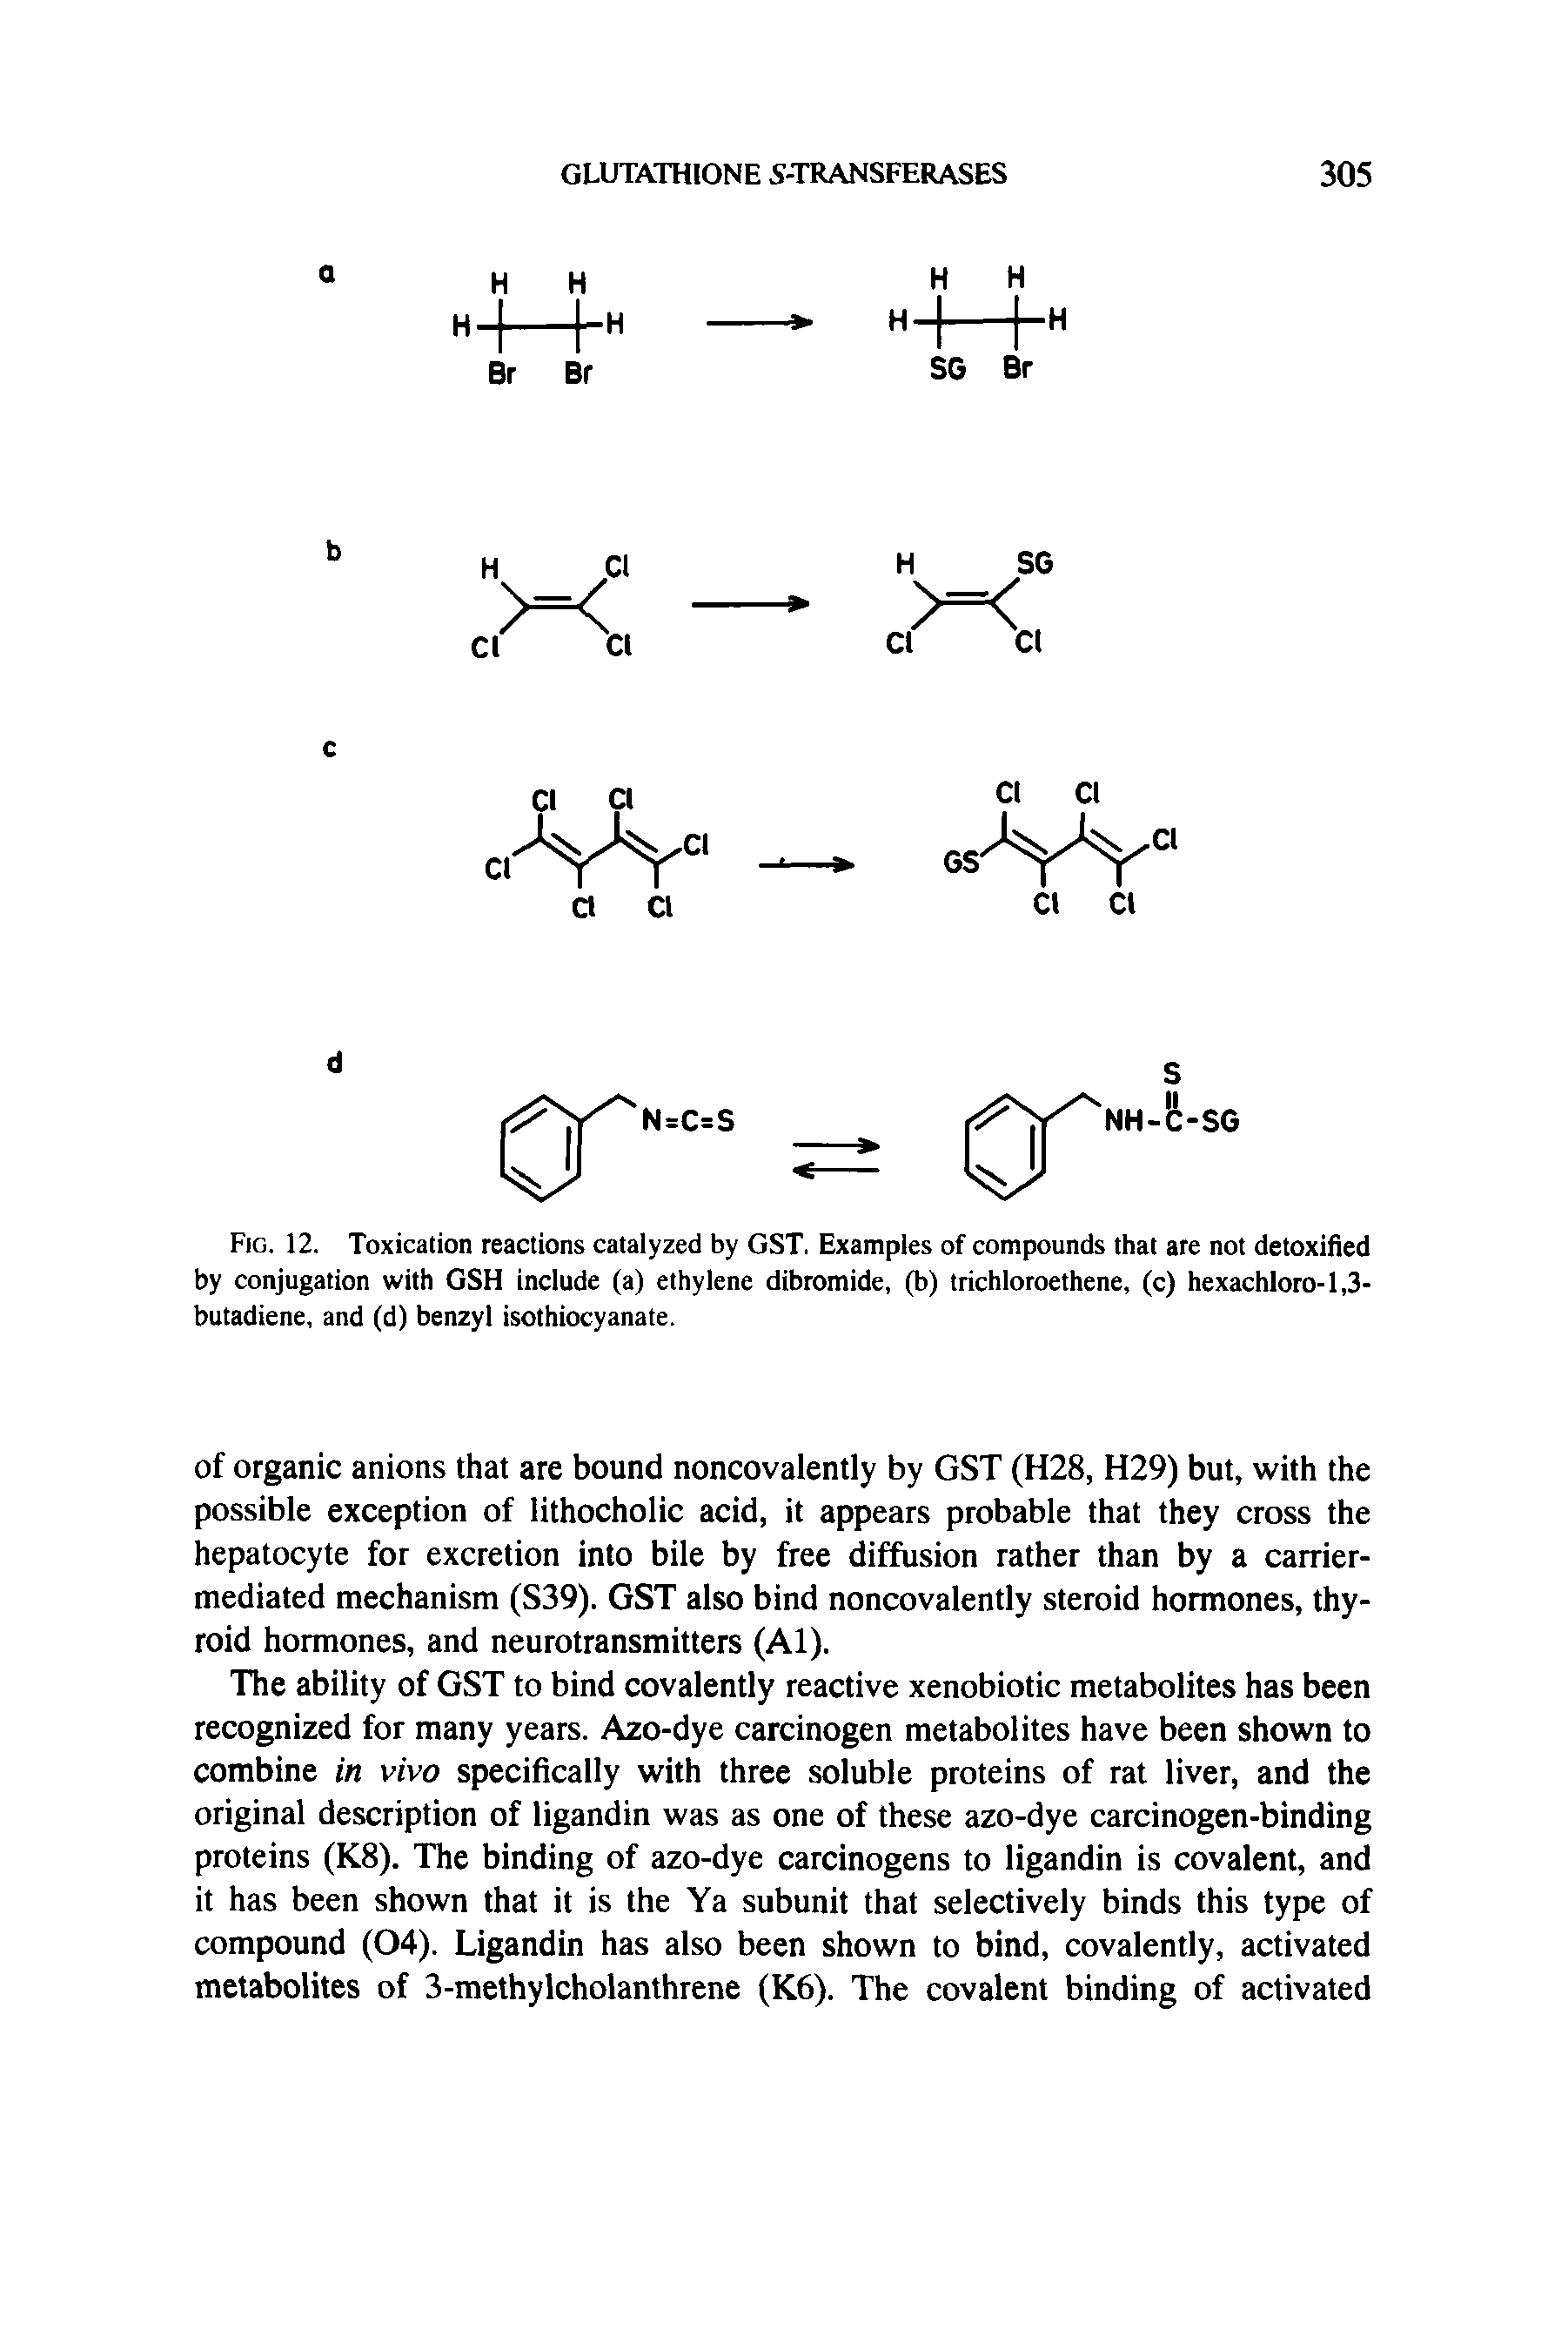 Fig. 12. Toxication reactions catalyzed by GST. Examples of compounds that are not detoxified by conjugation with GSH include (a) ethylene dibromide, (b) trichloroethene, (c) hexachloro-1,3-butadiene, and (d) benzyl isothiocyanate.